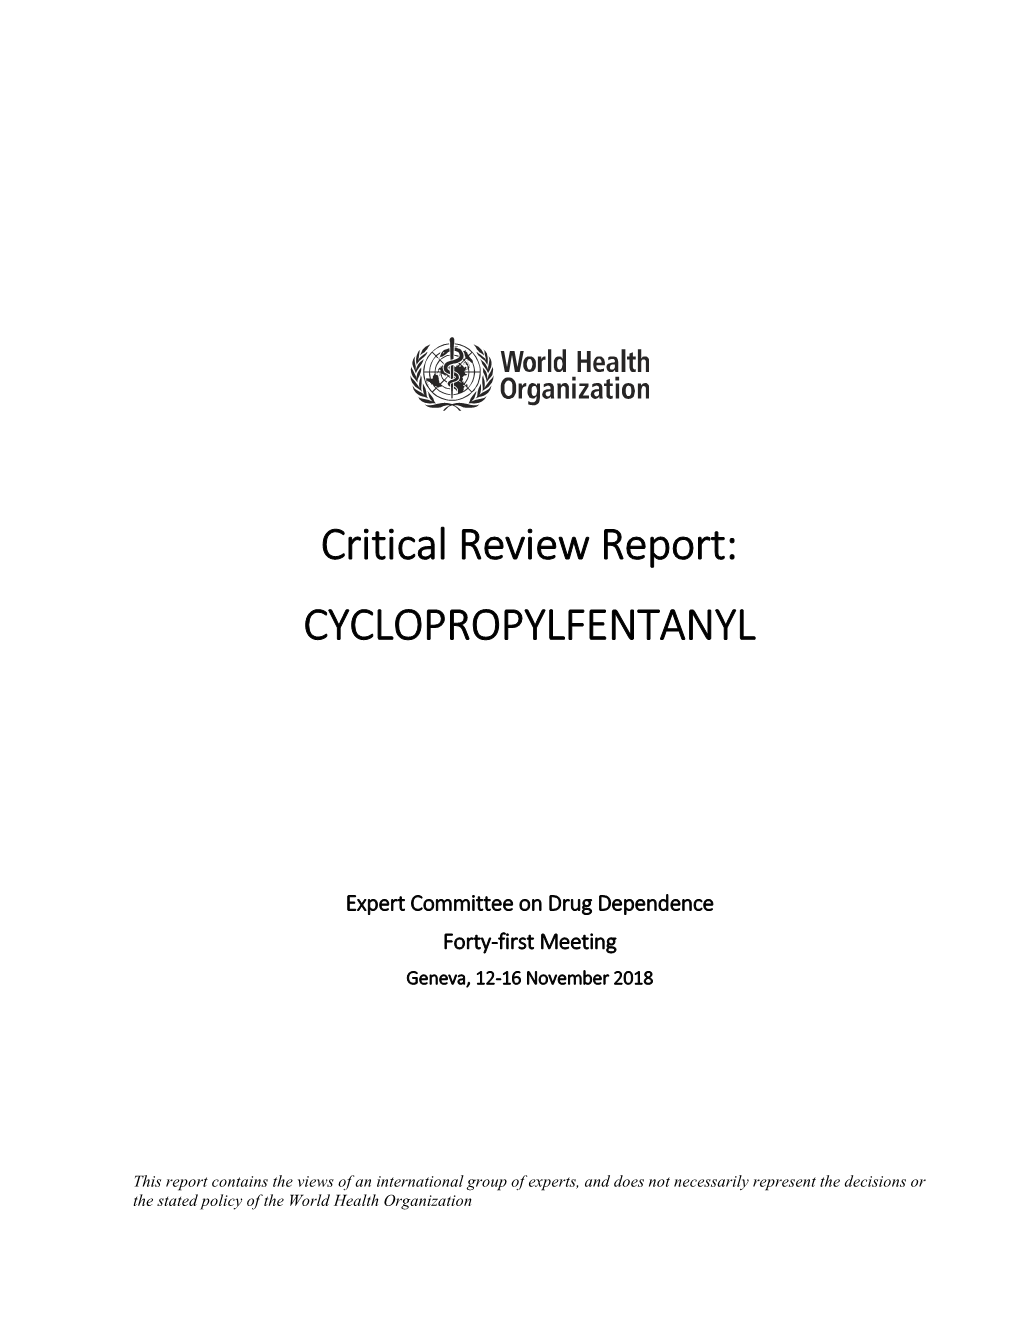 Critical Review Report: CYCLOPROPYLFENTANYL